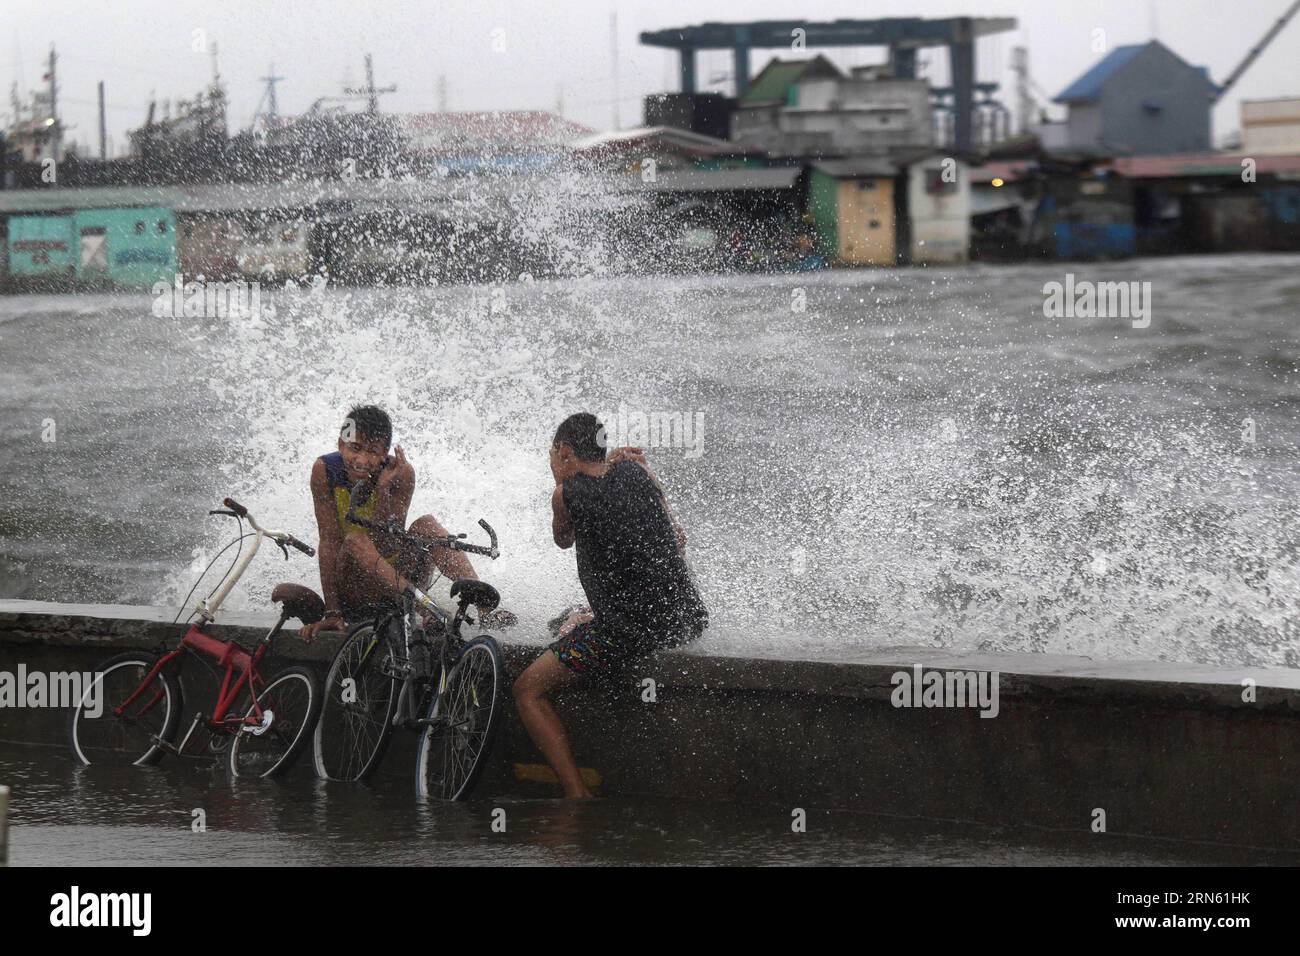 (150708) -- NAVOTAS CITY, July 8, 2015 -- Waves hit residents in Navotas City, the Philippines, July 8, 2015. Typhoon Chan-hom (local name Falcon) with maximum sustained winds of 130 kph near the center and gustiness of up to 160 kph brought heavy rain, strong winds, lightning and floods in northern Philippines, causing school and office suspensions, and cancellations in air and sea travel. ) (lrz) PHILIPPINES-NAVOTAS CITY-TYPHOON-WAVES RouellexUmali PUBLICATIONxNOTxINxCHN   150708 NAVOTAS City July 8 2015 Waves Hit Residents in NAVOTAS City The Philippines July 8 2015 Typhoon Chan Hom Local N Stock Photo